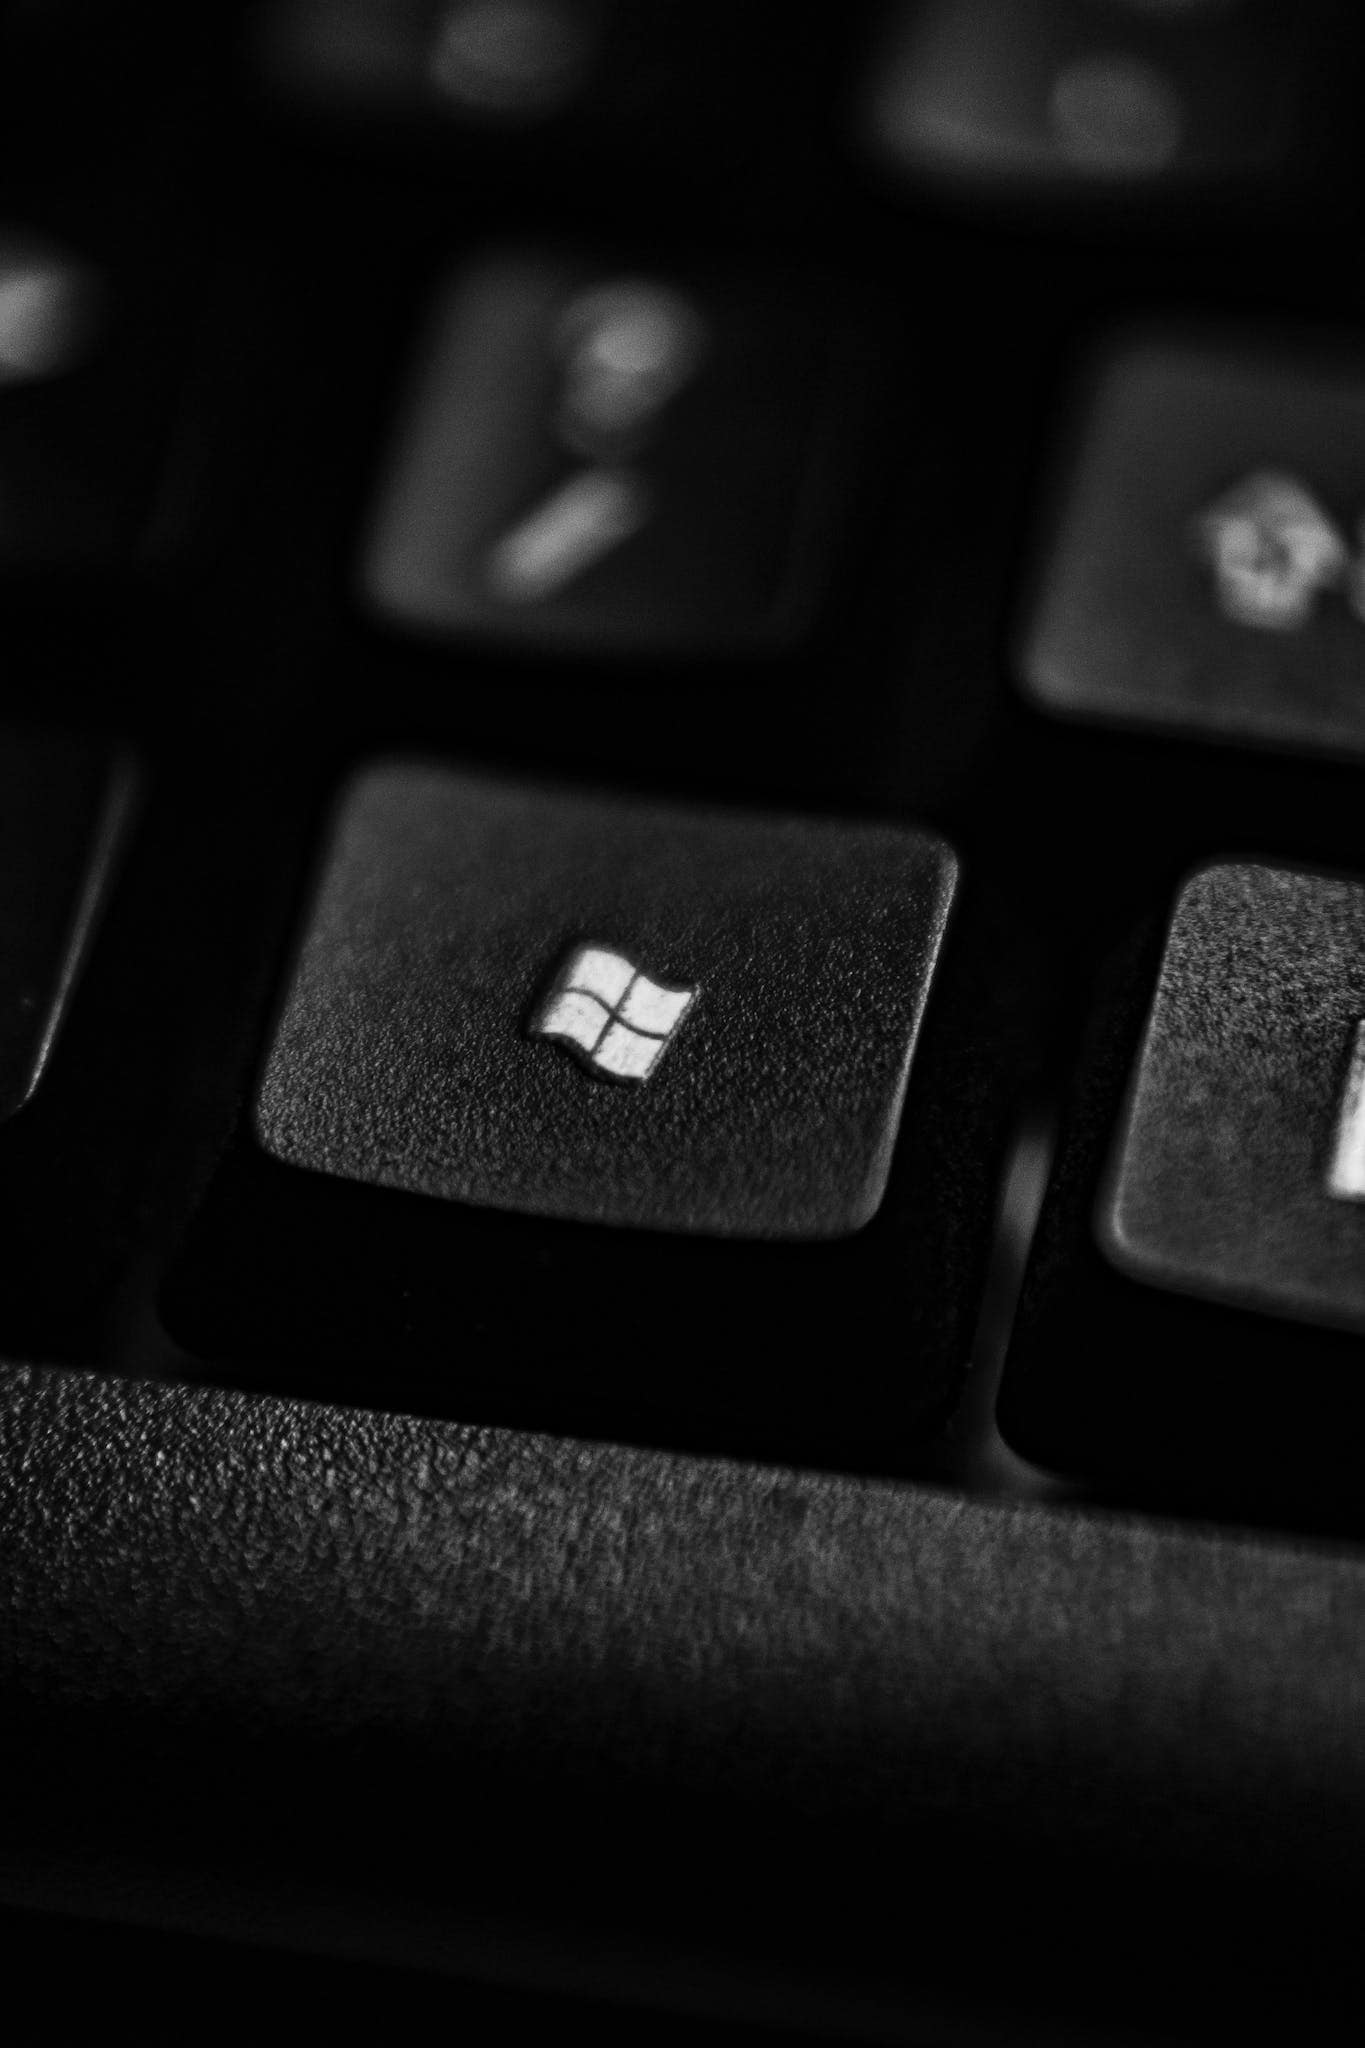 How to Turn Off Mouse Acceleration in Windows 11